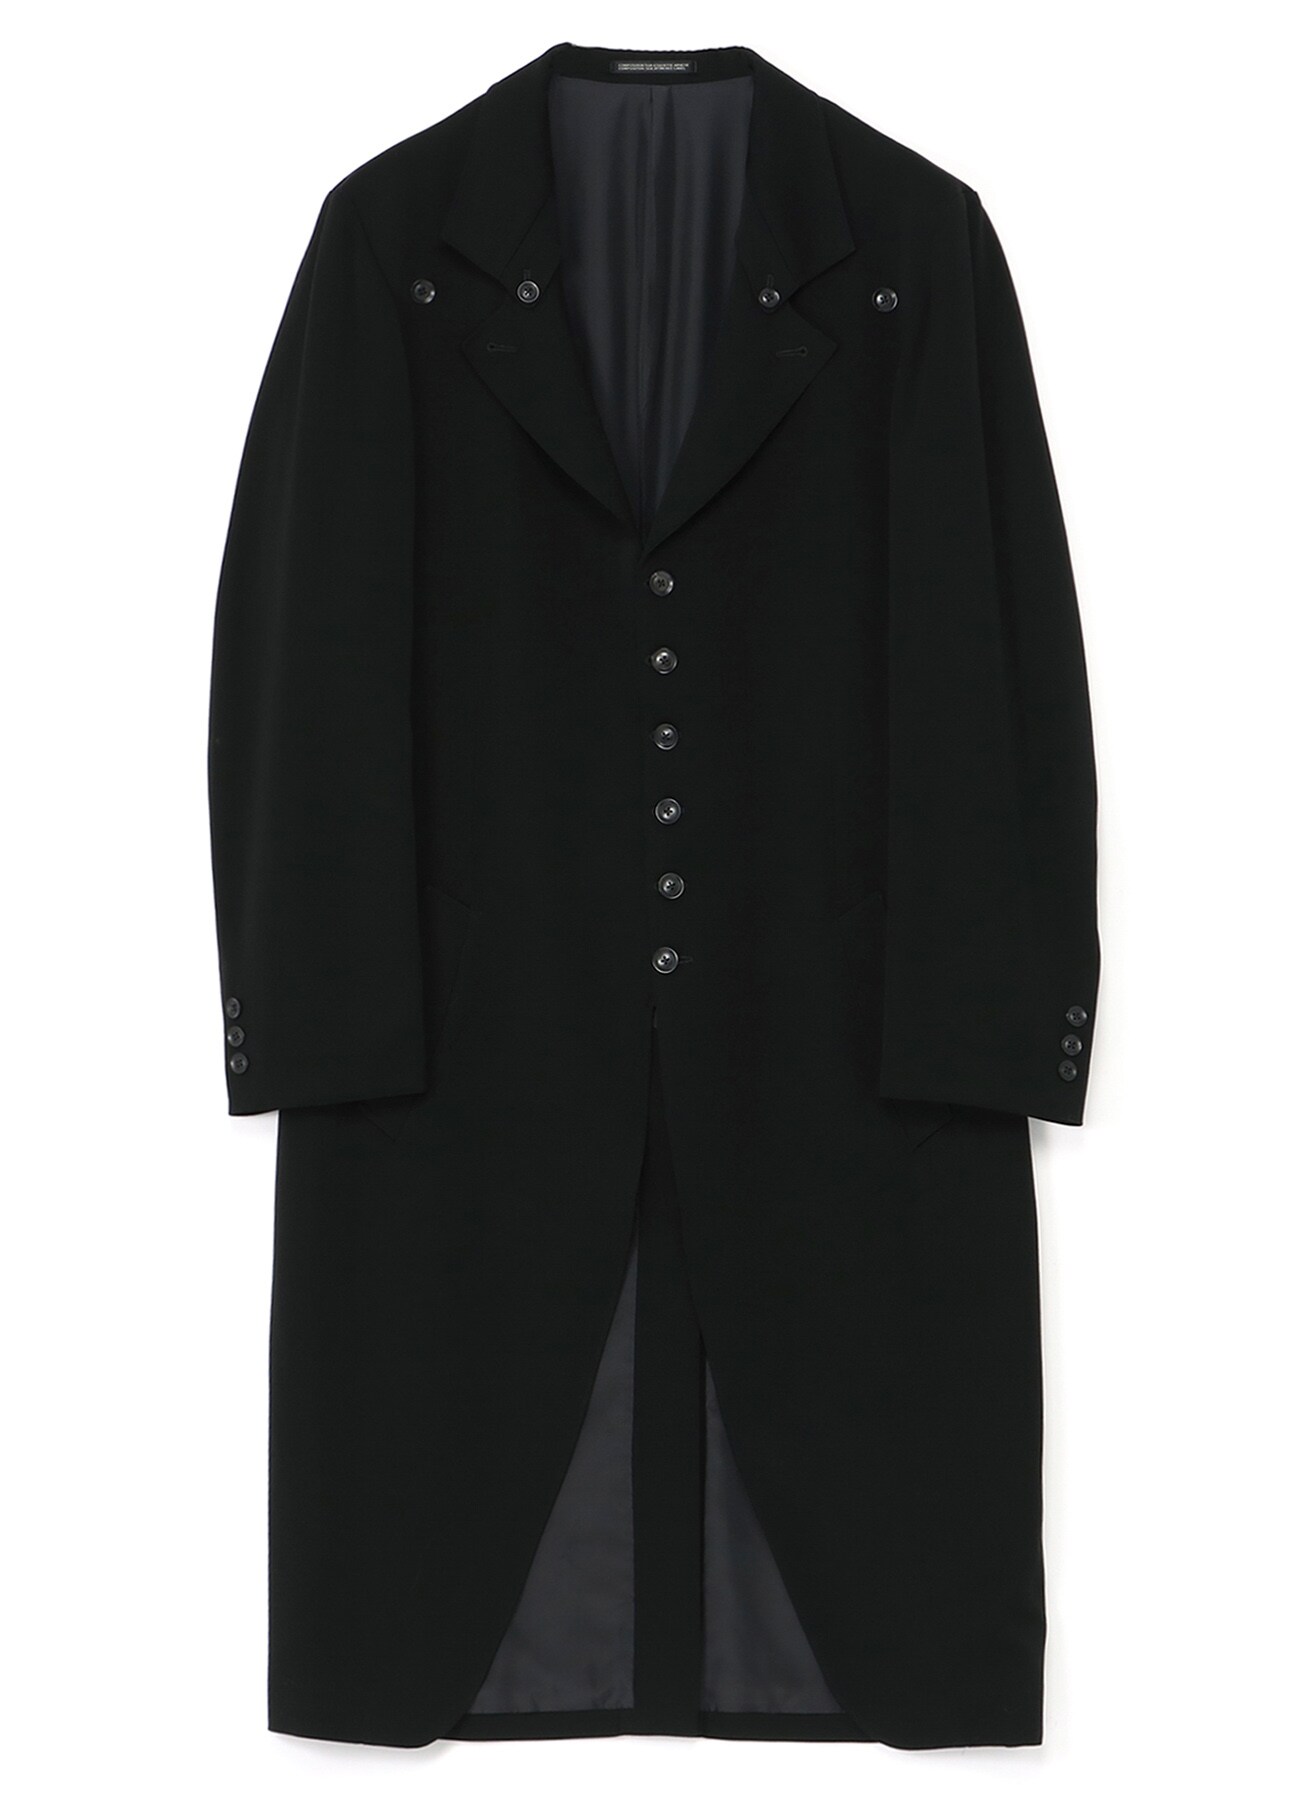 WOOL TUXEDO FRONT BUTTING 6BUTTONS JACKET